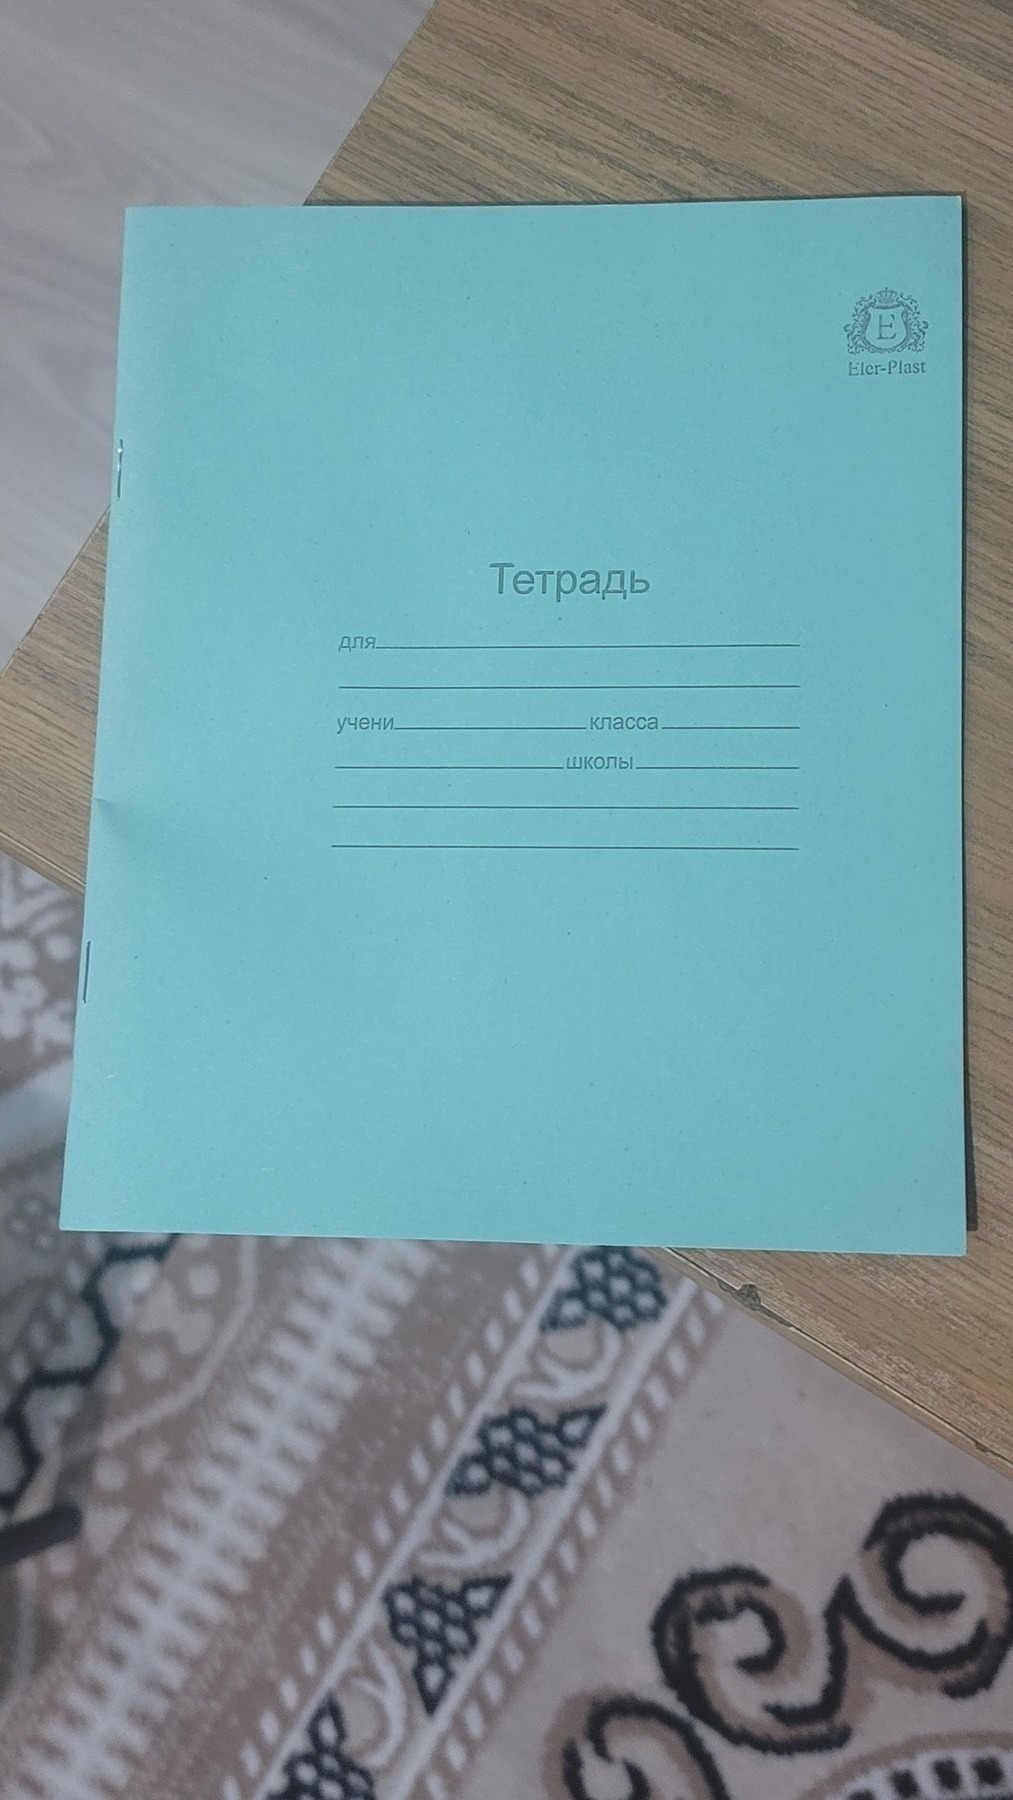 green paper notebook with тетрадь written on the front ("notebook" in Russian)